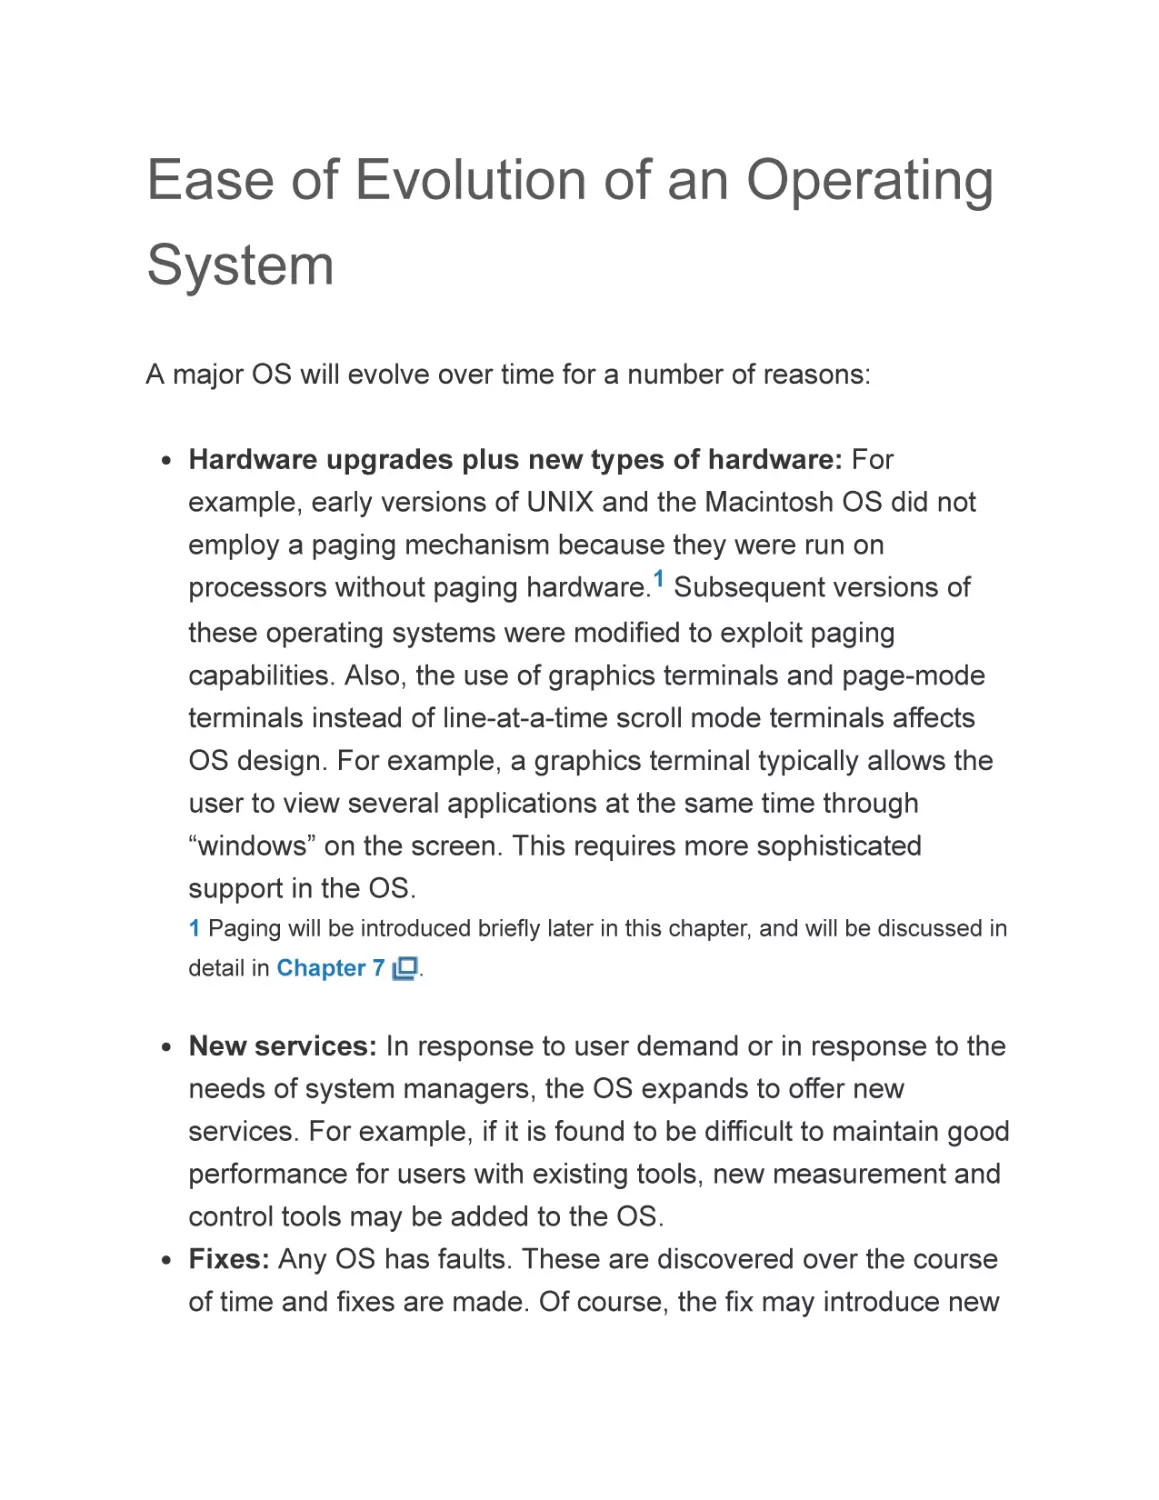 Ease of Evolution of an Operating System